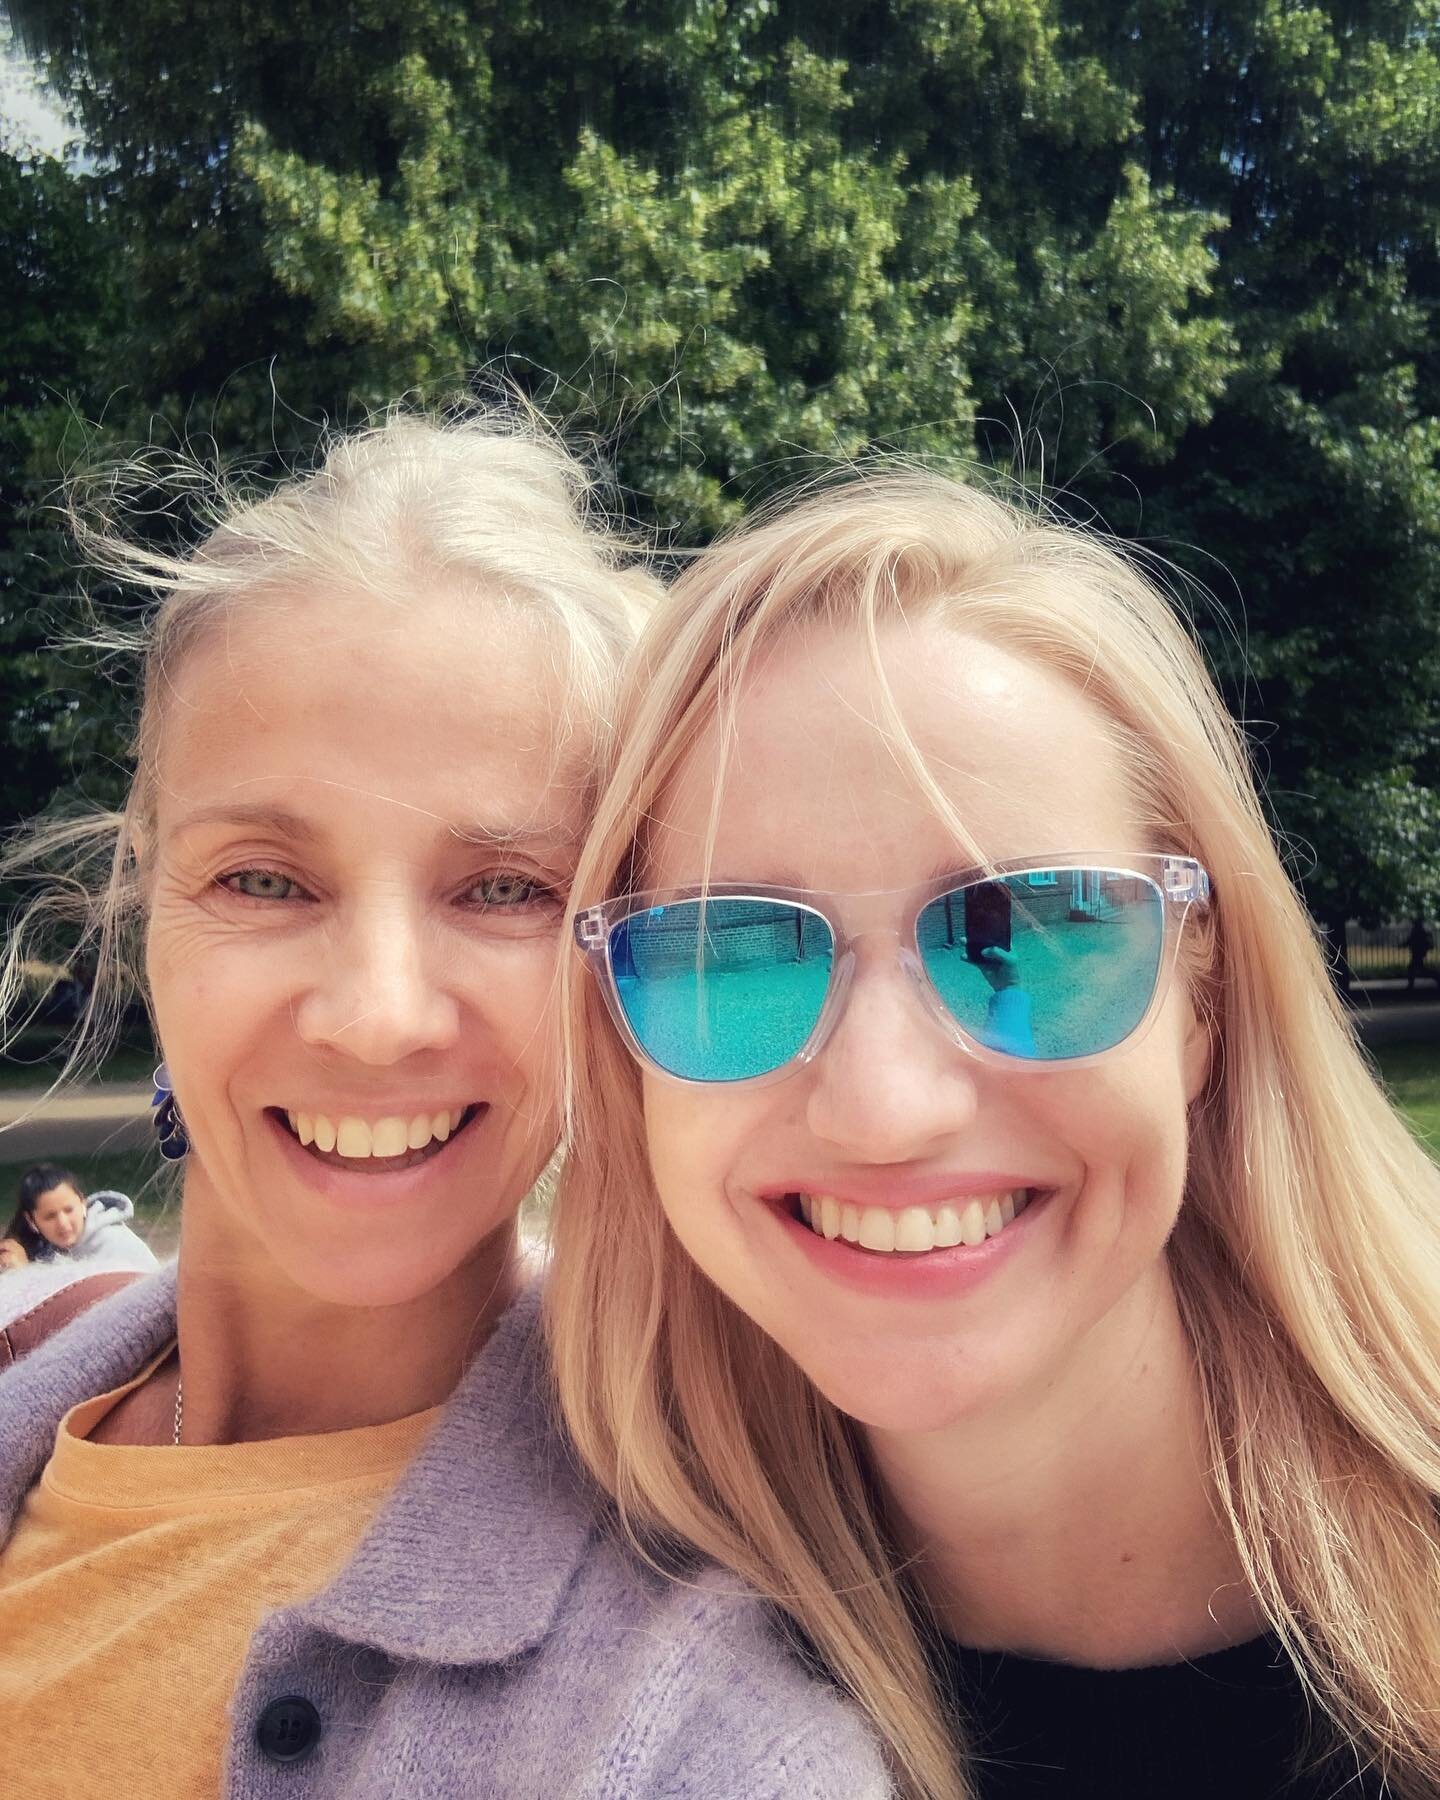 My very dear Singapore pal is visiting the UK and has made the sun shine.

Treasure your friends. 
When they&rsquo;re not near you, call them. Send them voice messages, text them.

And when you&rsquo;re together, sit in the sunshine, talk all the tal